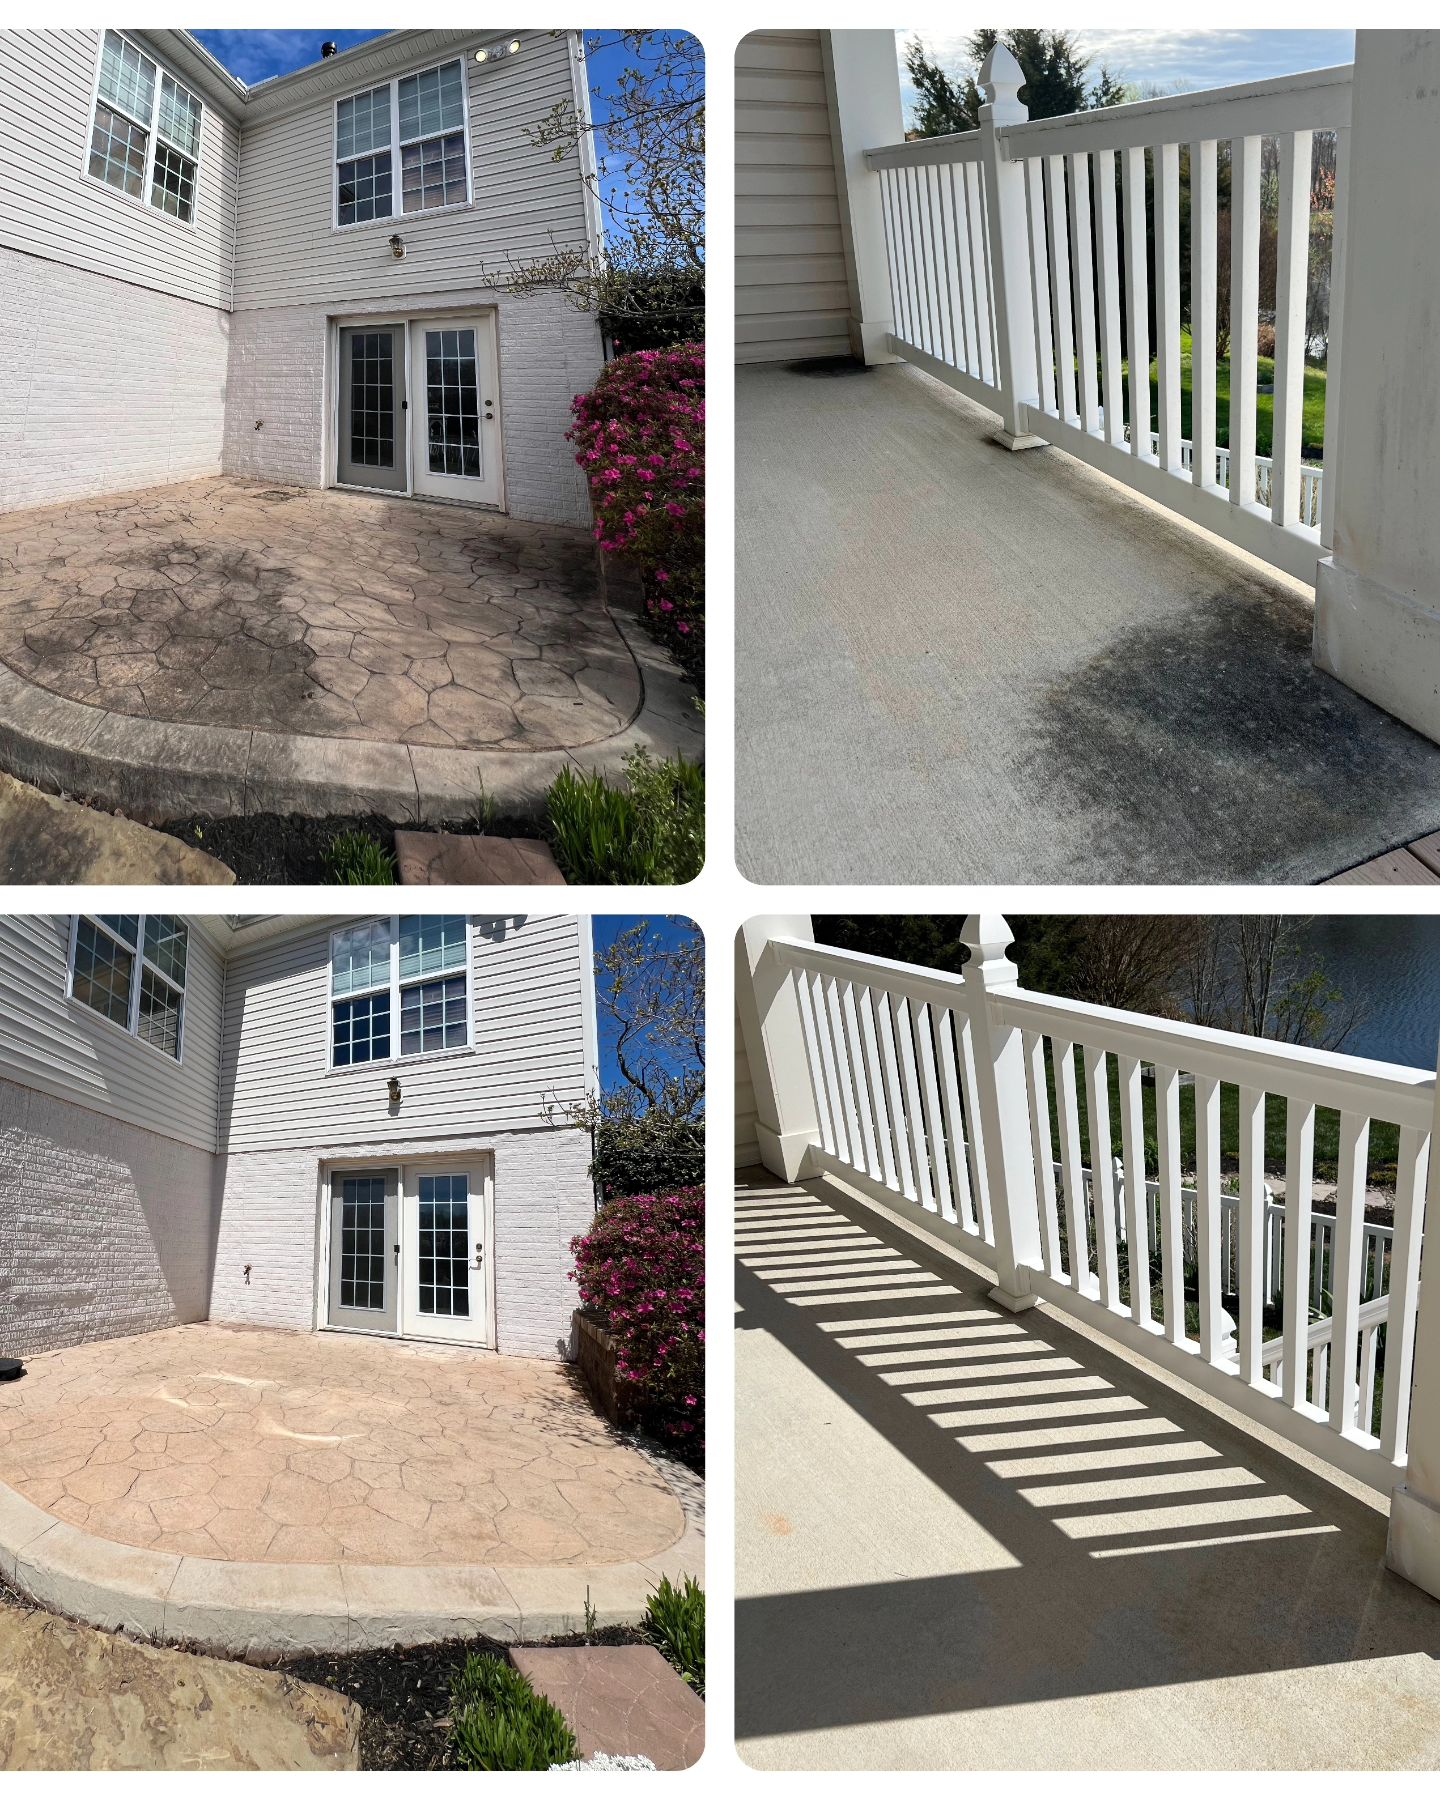 Check out these awesome Before & Afters on a few projects this week 📸📸 from King George to Spotsylvania to Stafford to Orange. You need it, we complete it 👍👌
Excited to complete these wood deck stainings, shed stainings, and interior painting 🏡🚿🖌
www.pressureandsoftwashingwcap.com